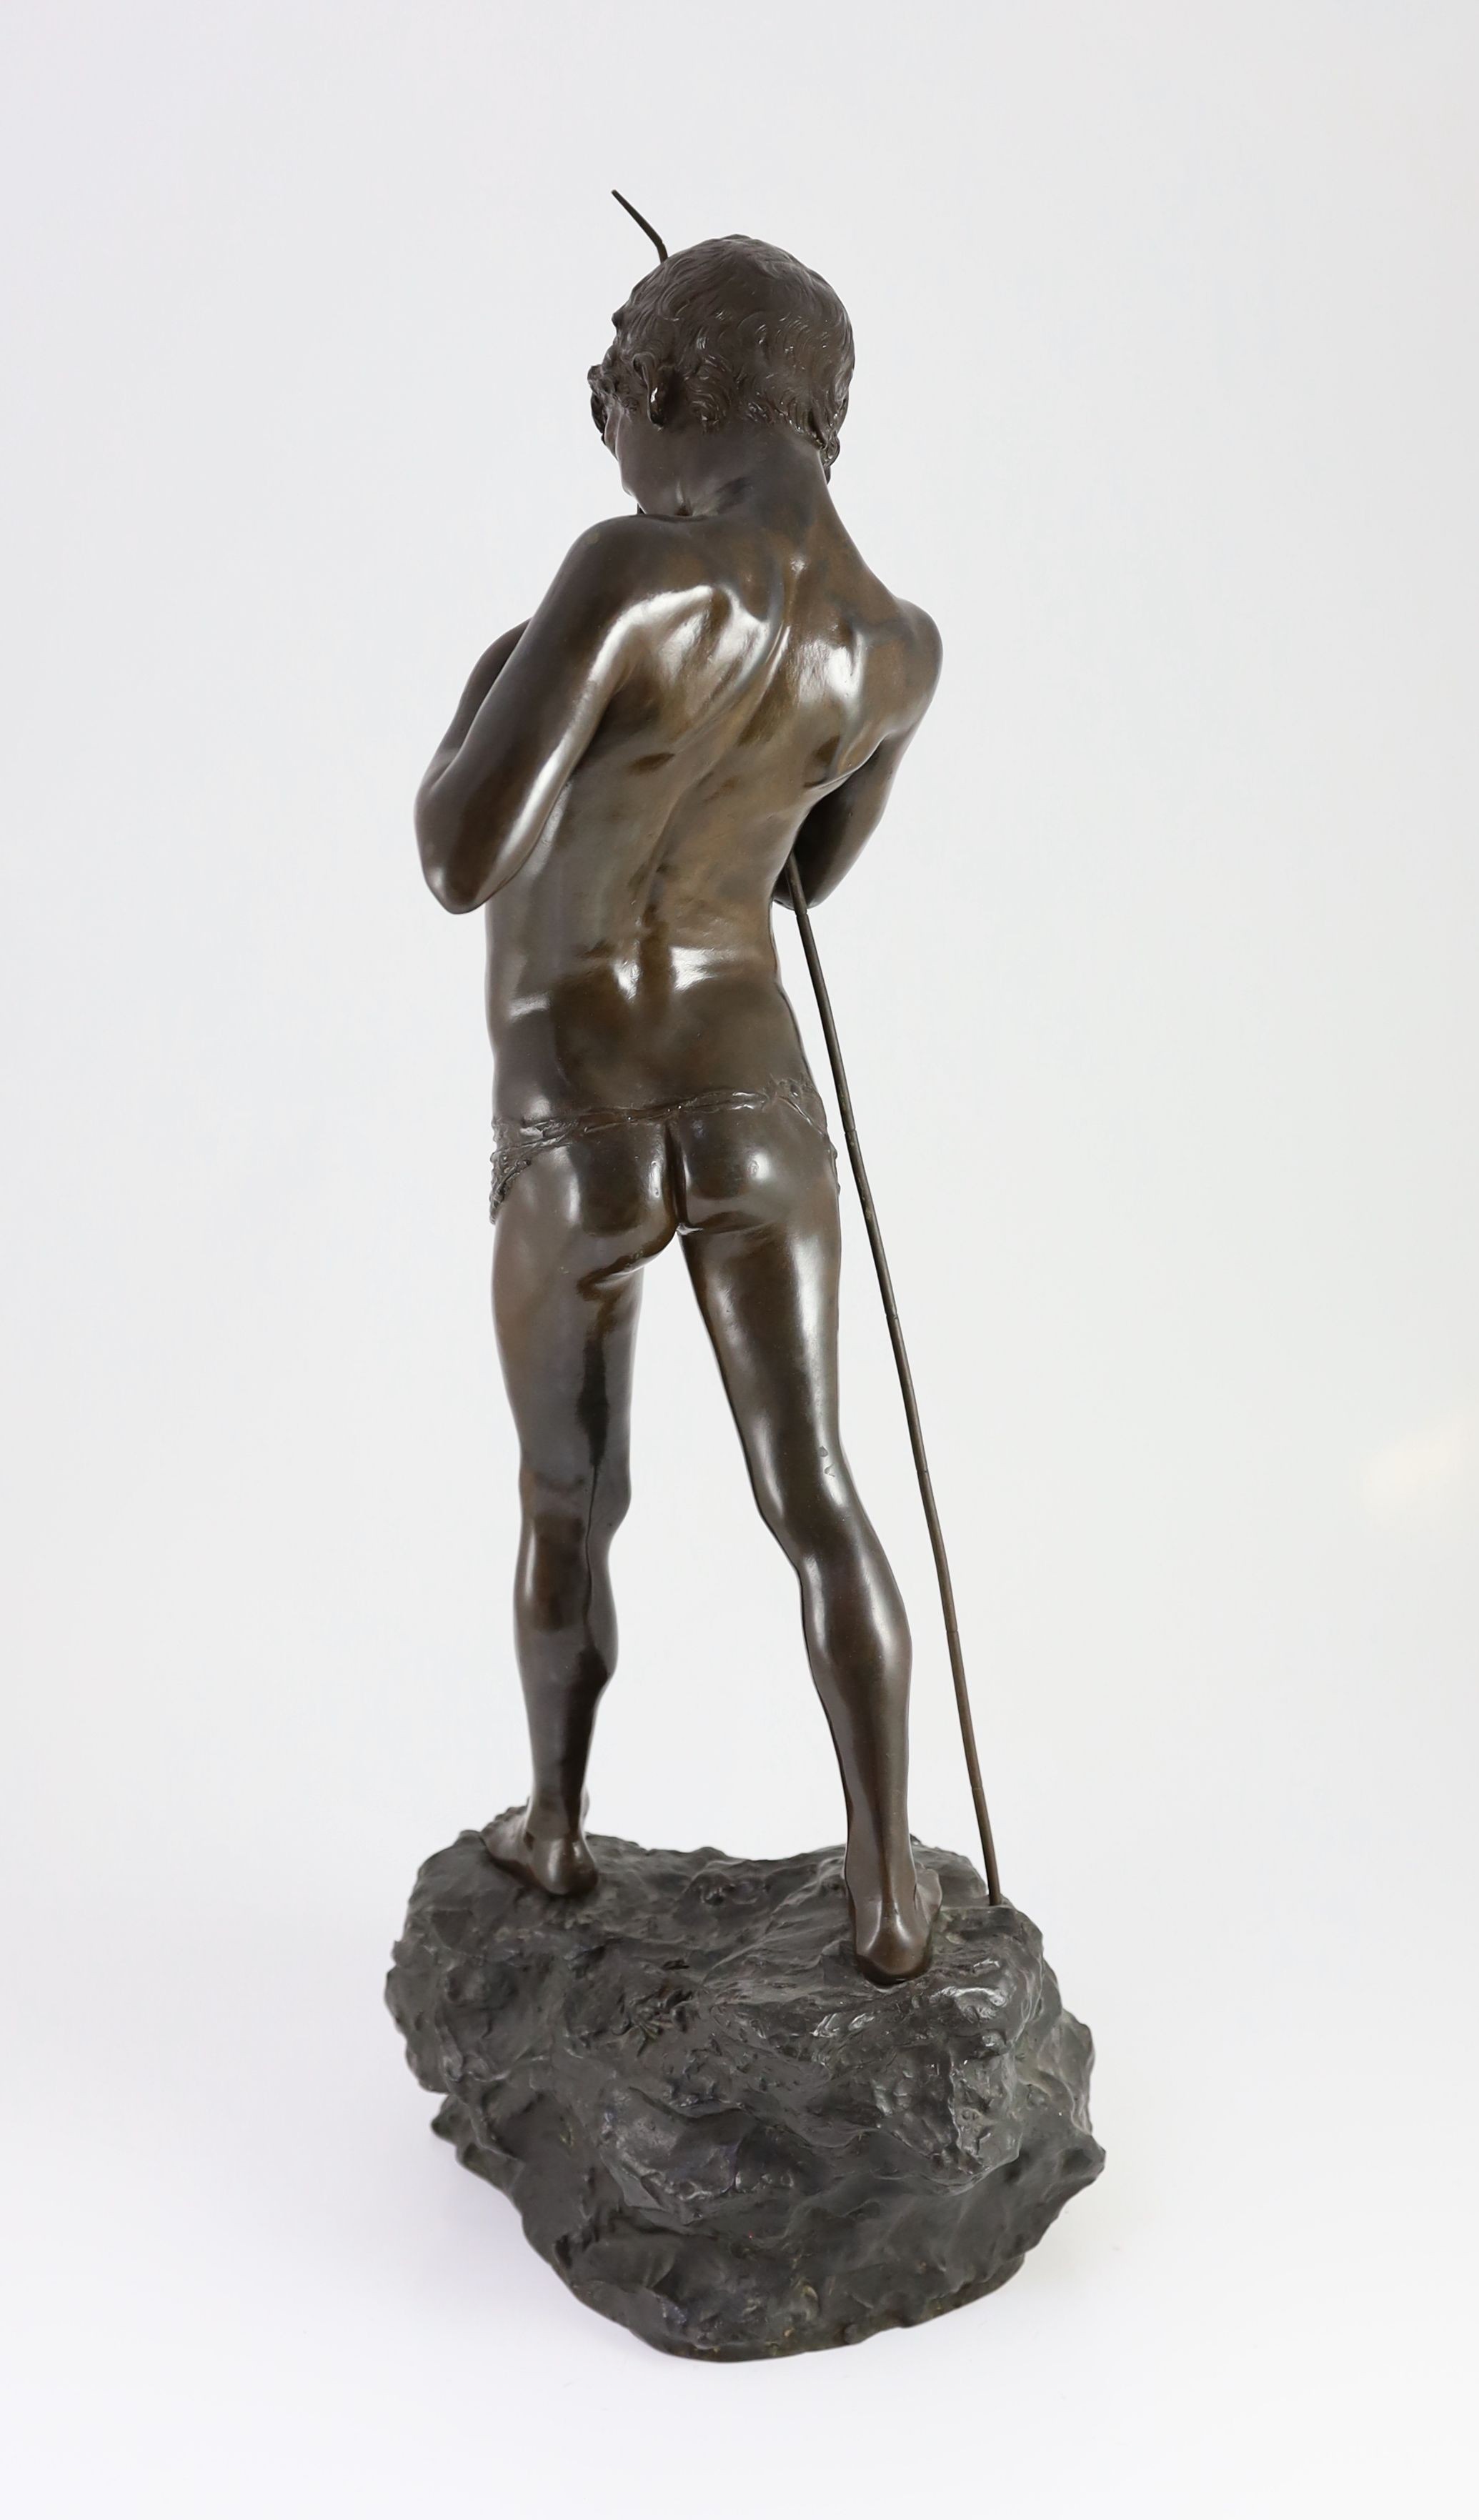 Giovanni Varlese (Italian, 1888-1922). A bronze figure of a fisherboy standing holding a fish to his chest, height 72cm